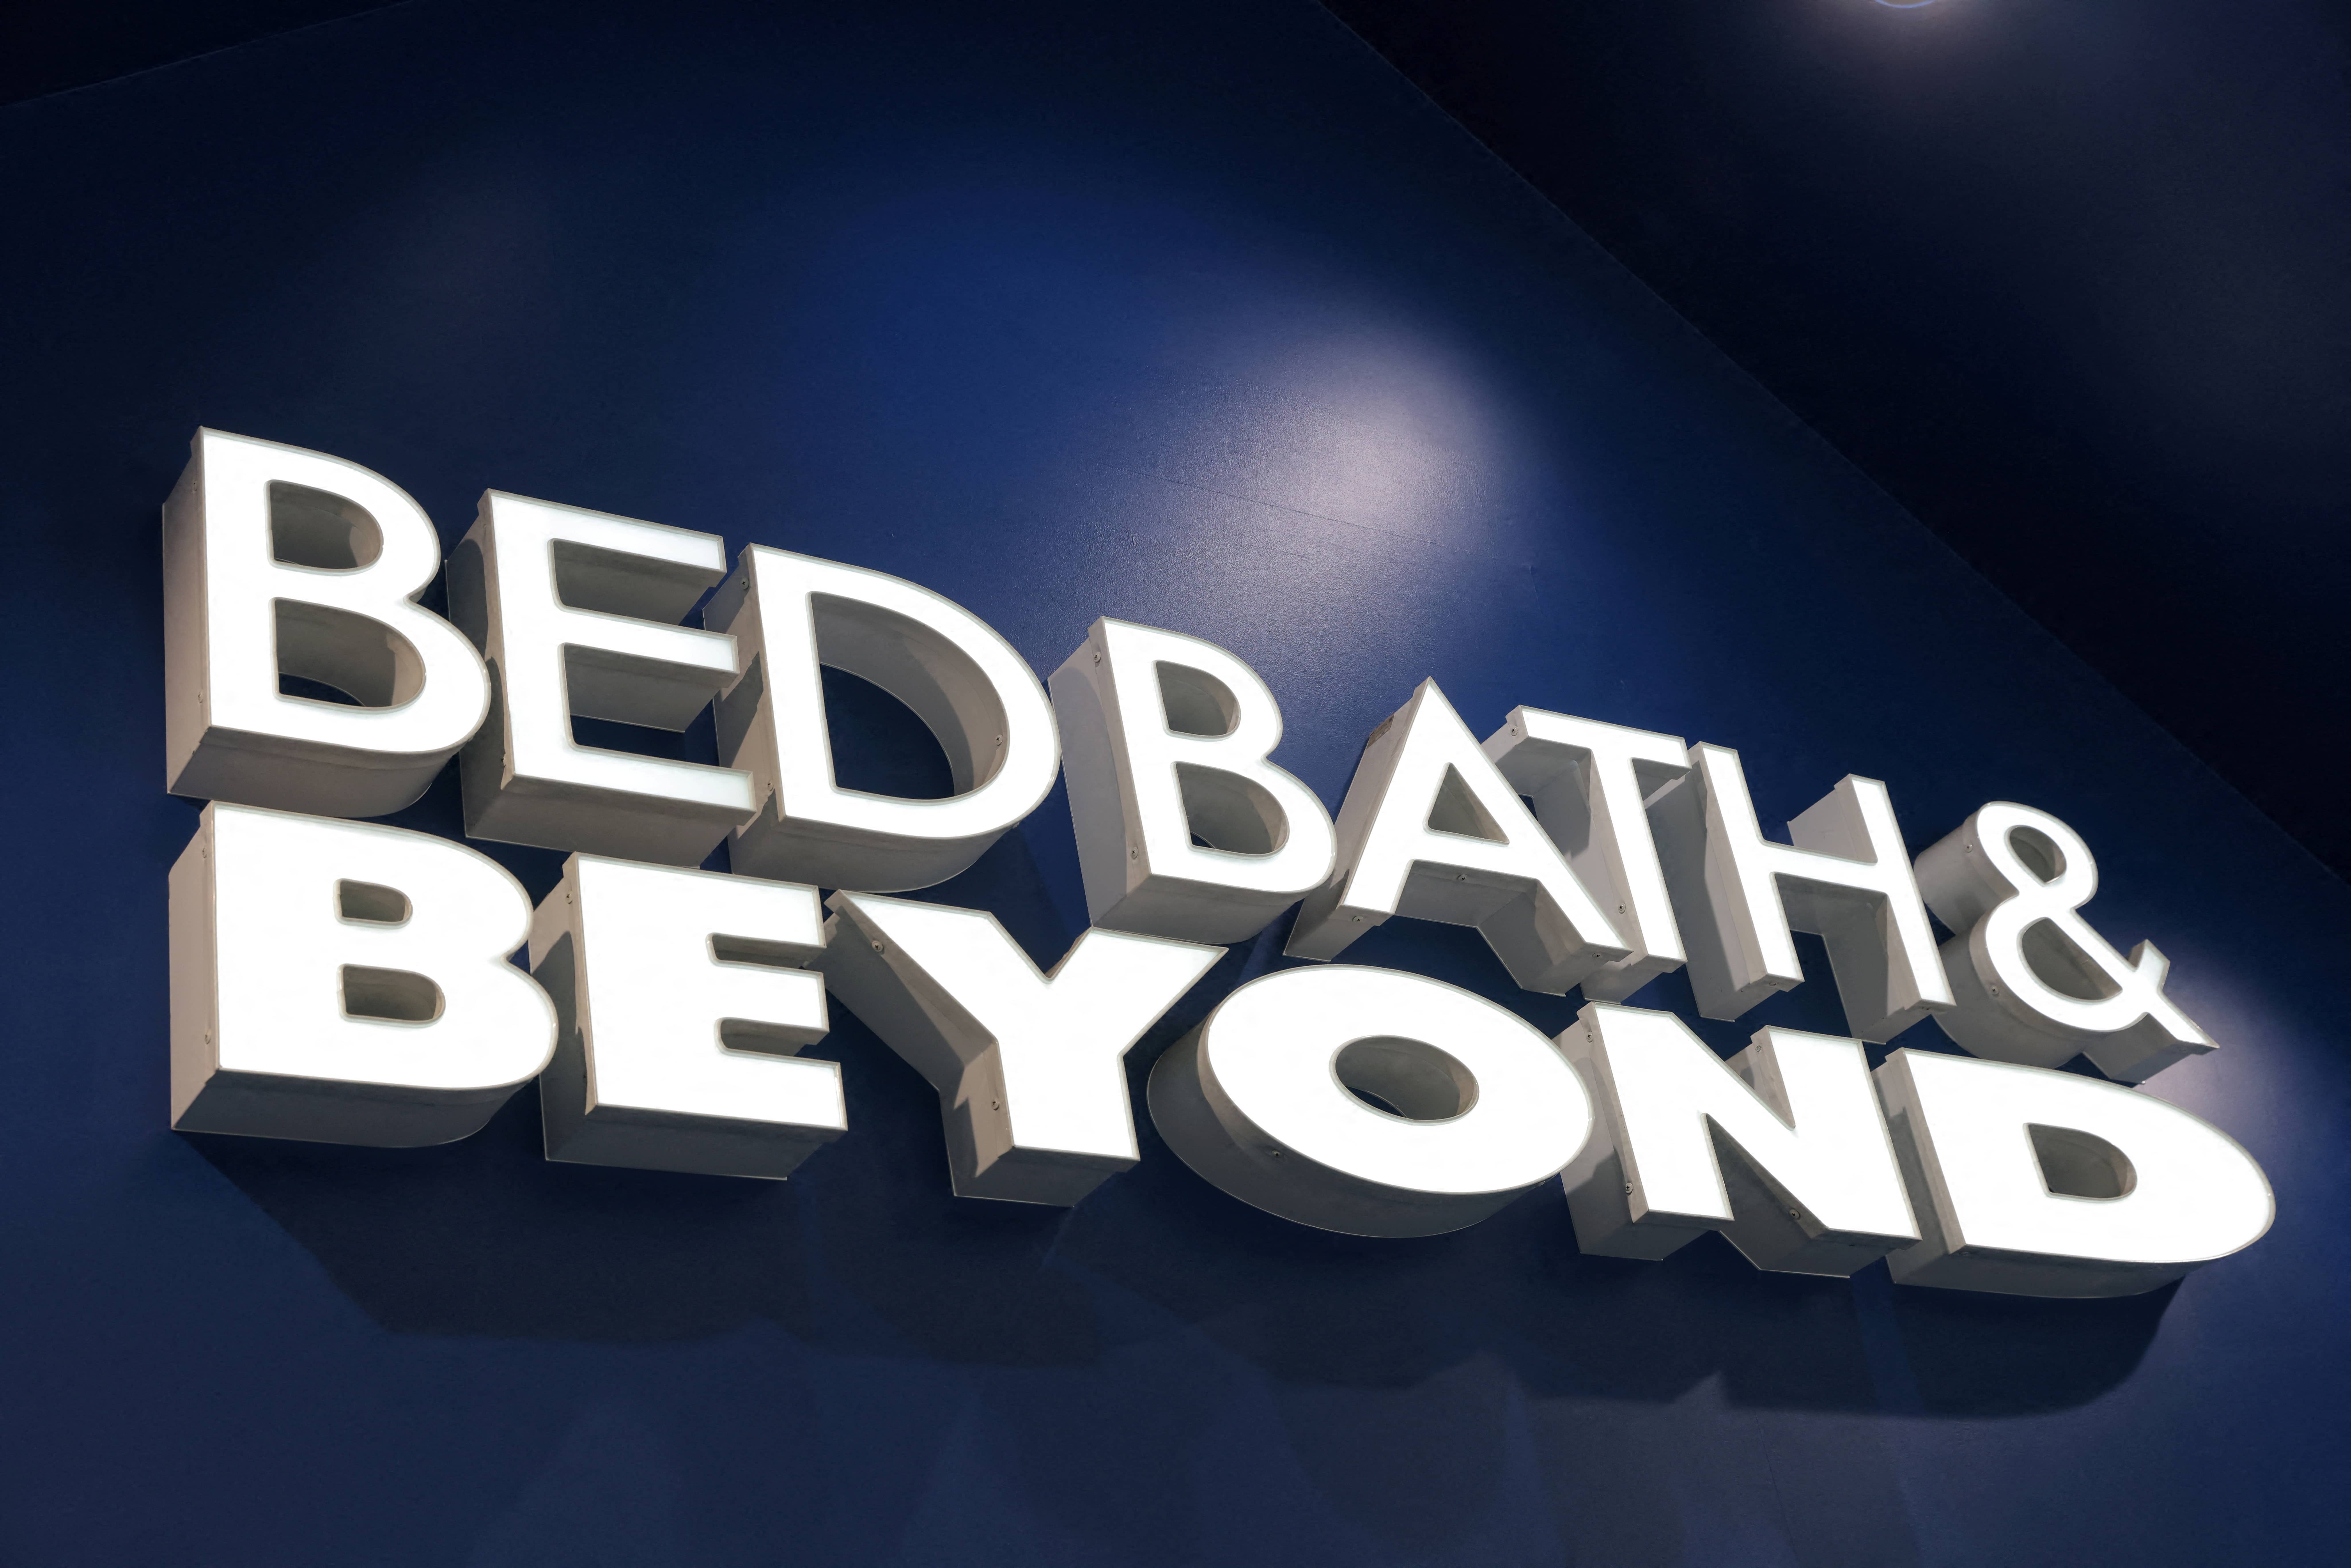 file-photo-signage-is-seen-at-a-bed-bath-beyond-store-in-manhattan-new-york-city